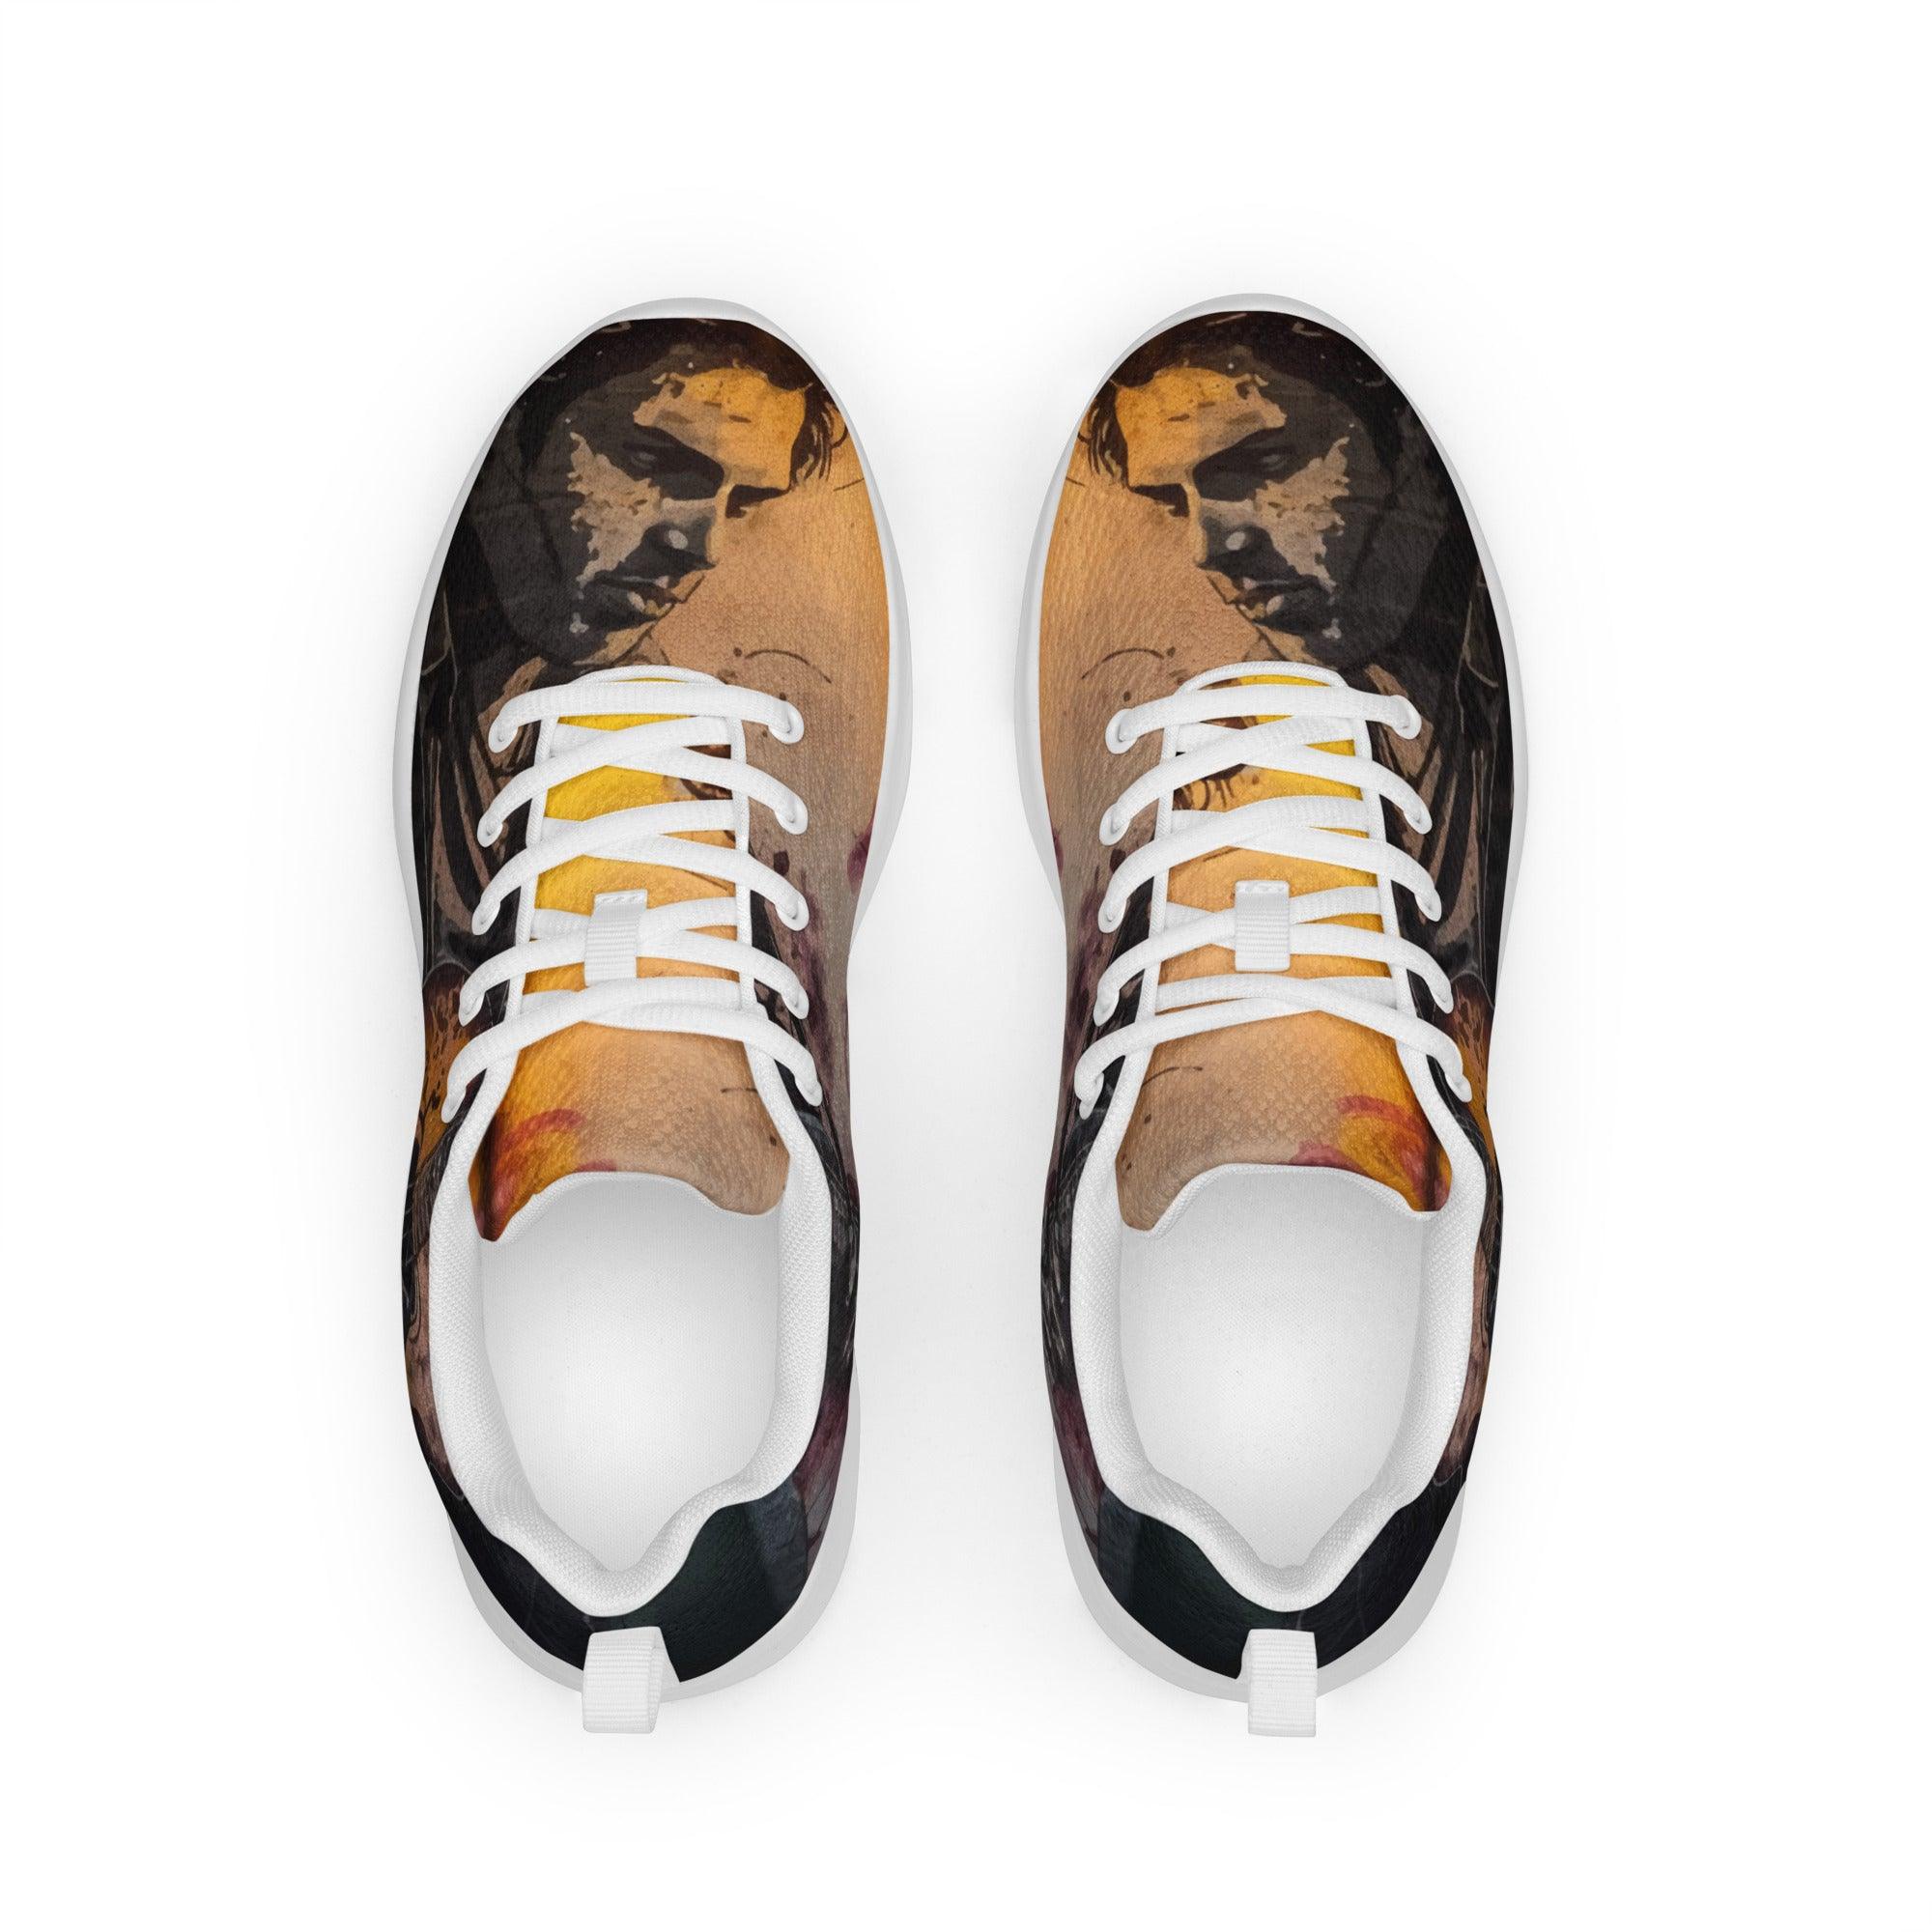 Making Music Come Alive Men’s Athletic Shoes - Beyond T-shirts